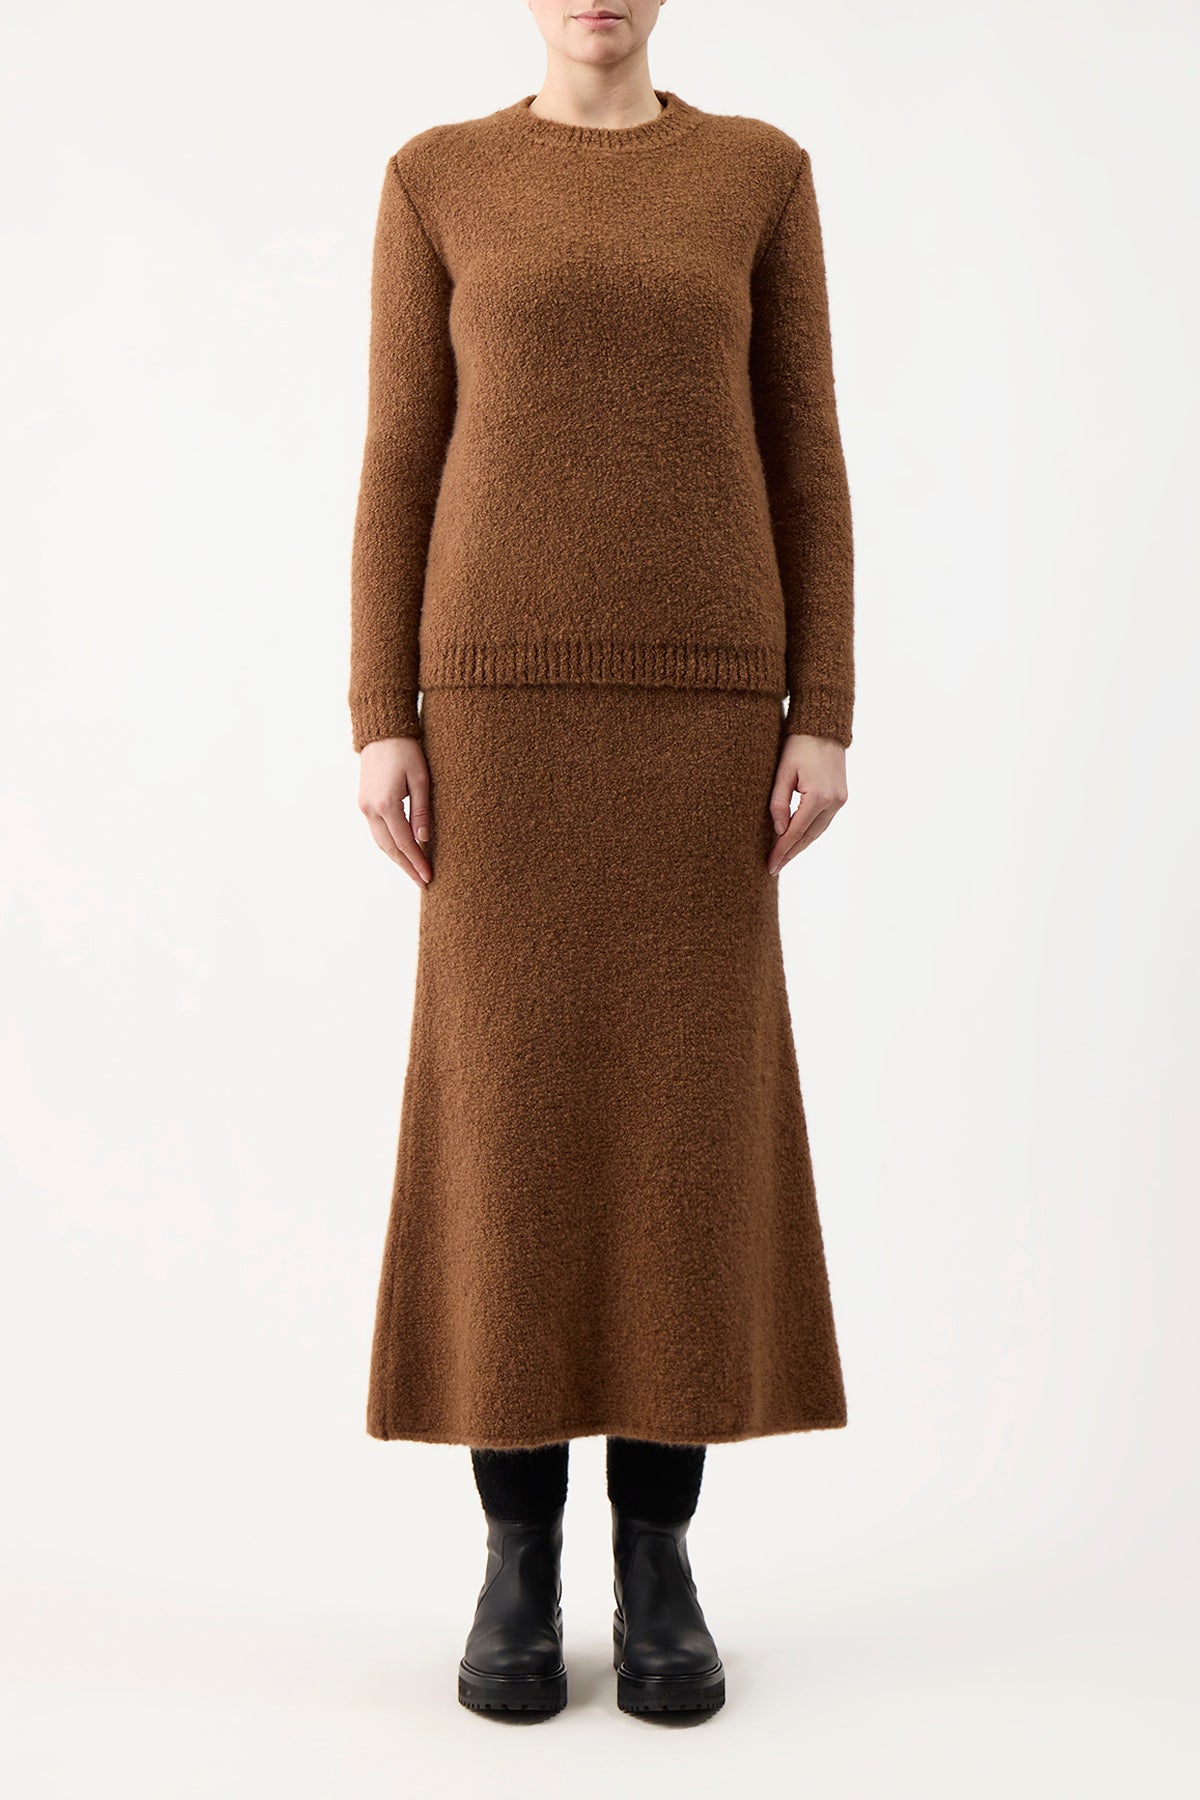 Philippe Knit Sweater in Cognac Cashmere Boucle